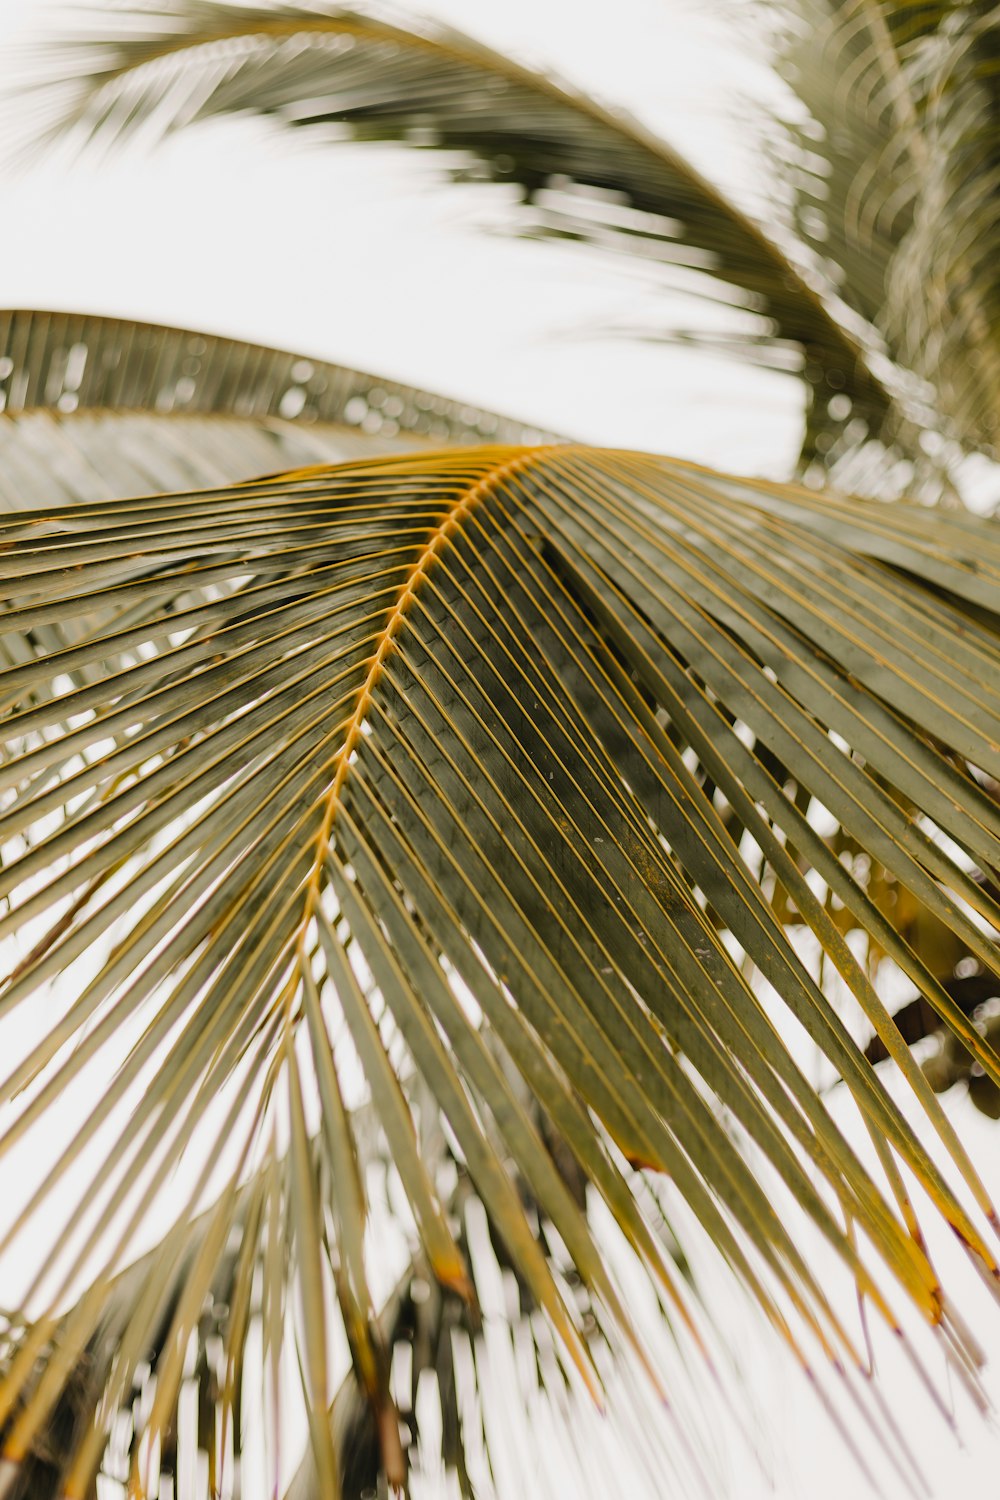 a close up of a palm tree's leaves